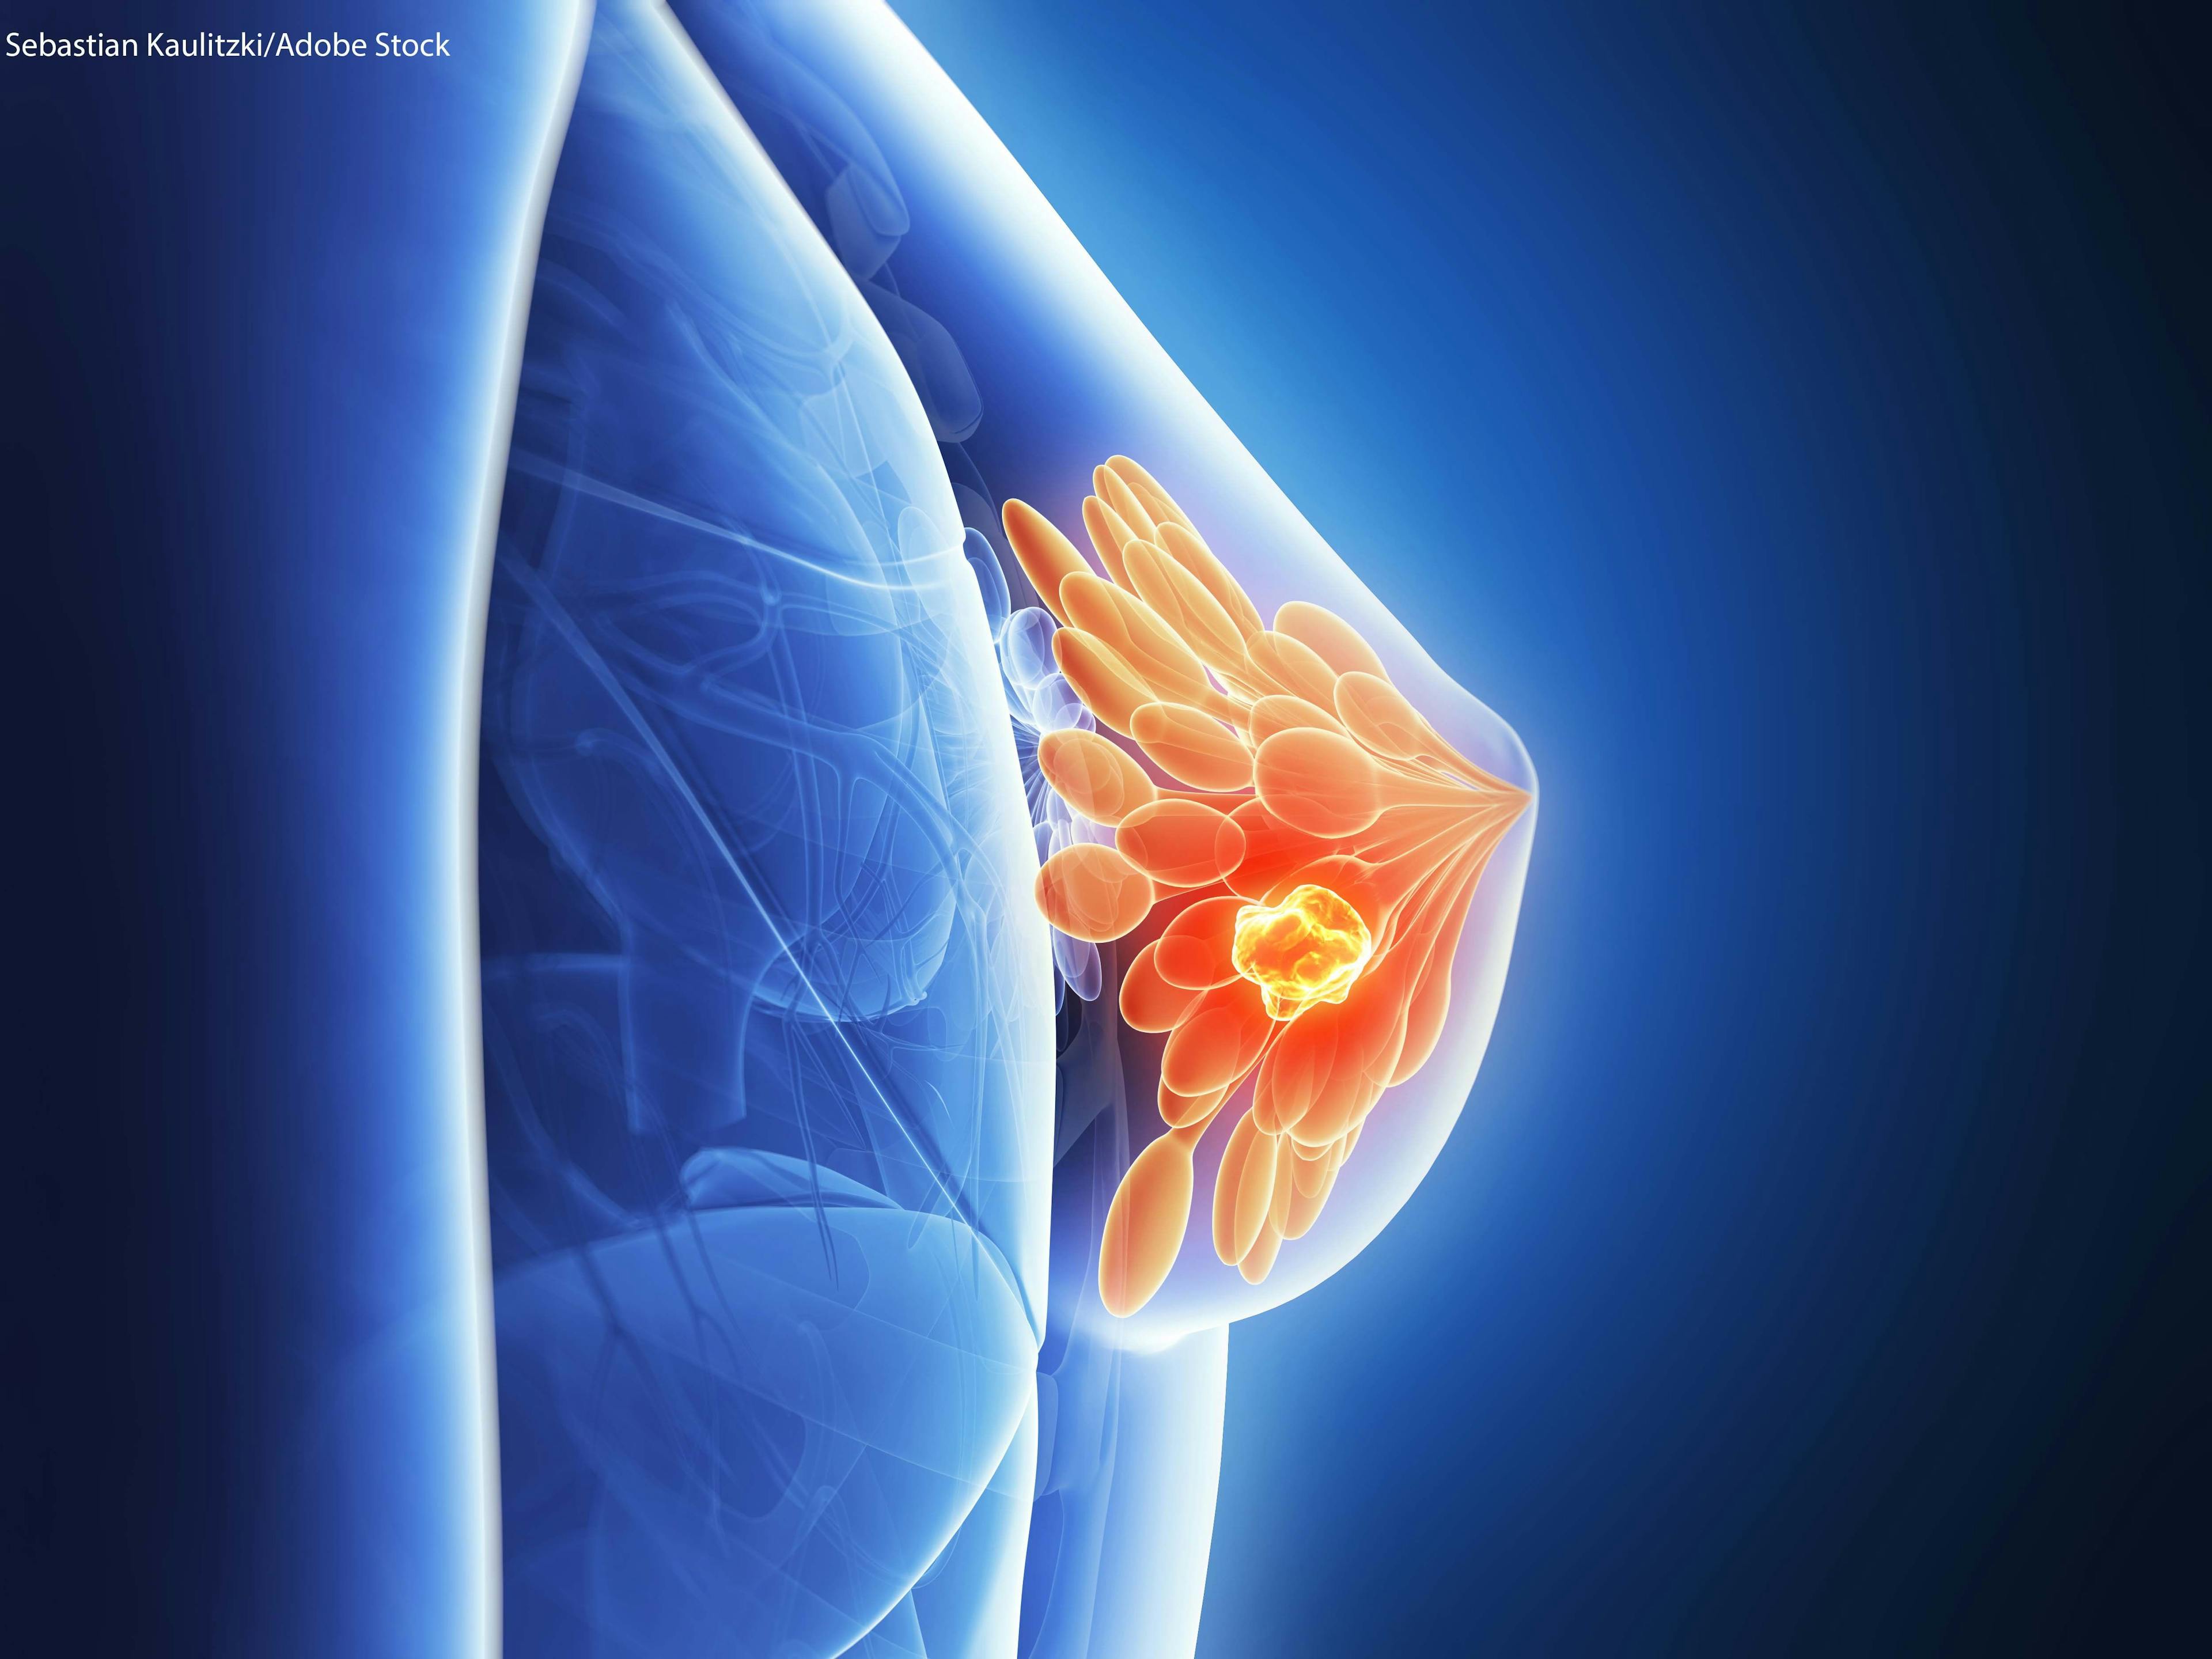 Does Adjuvant Therapy Benefit Those with Small HER2-Positive Breast Cancers?